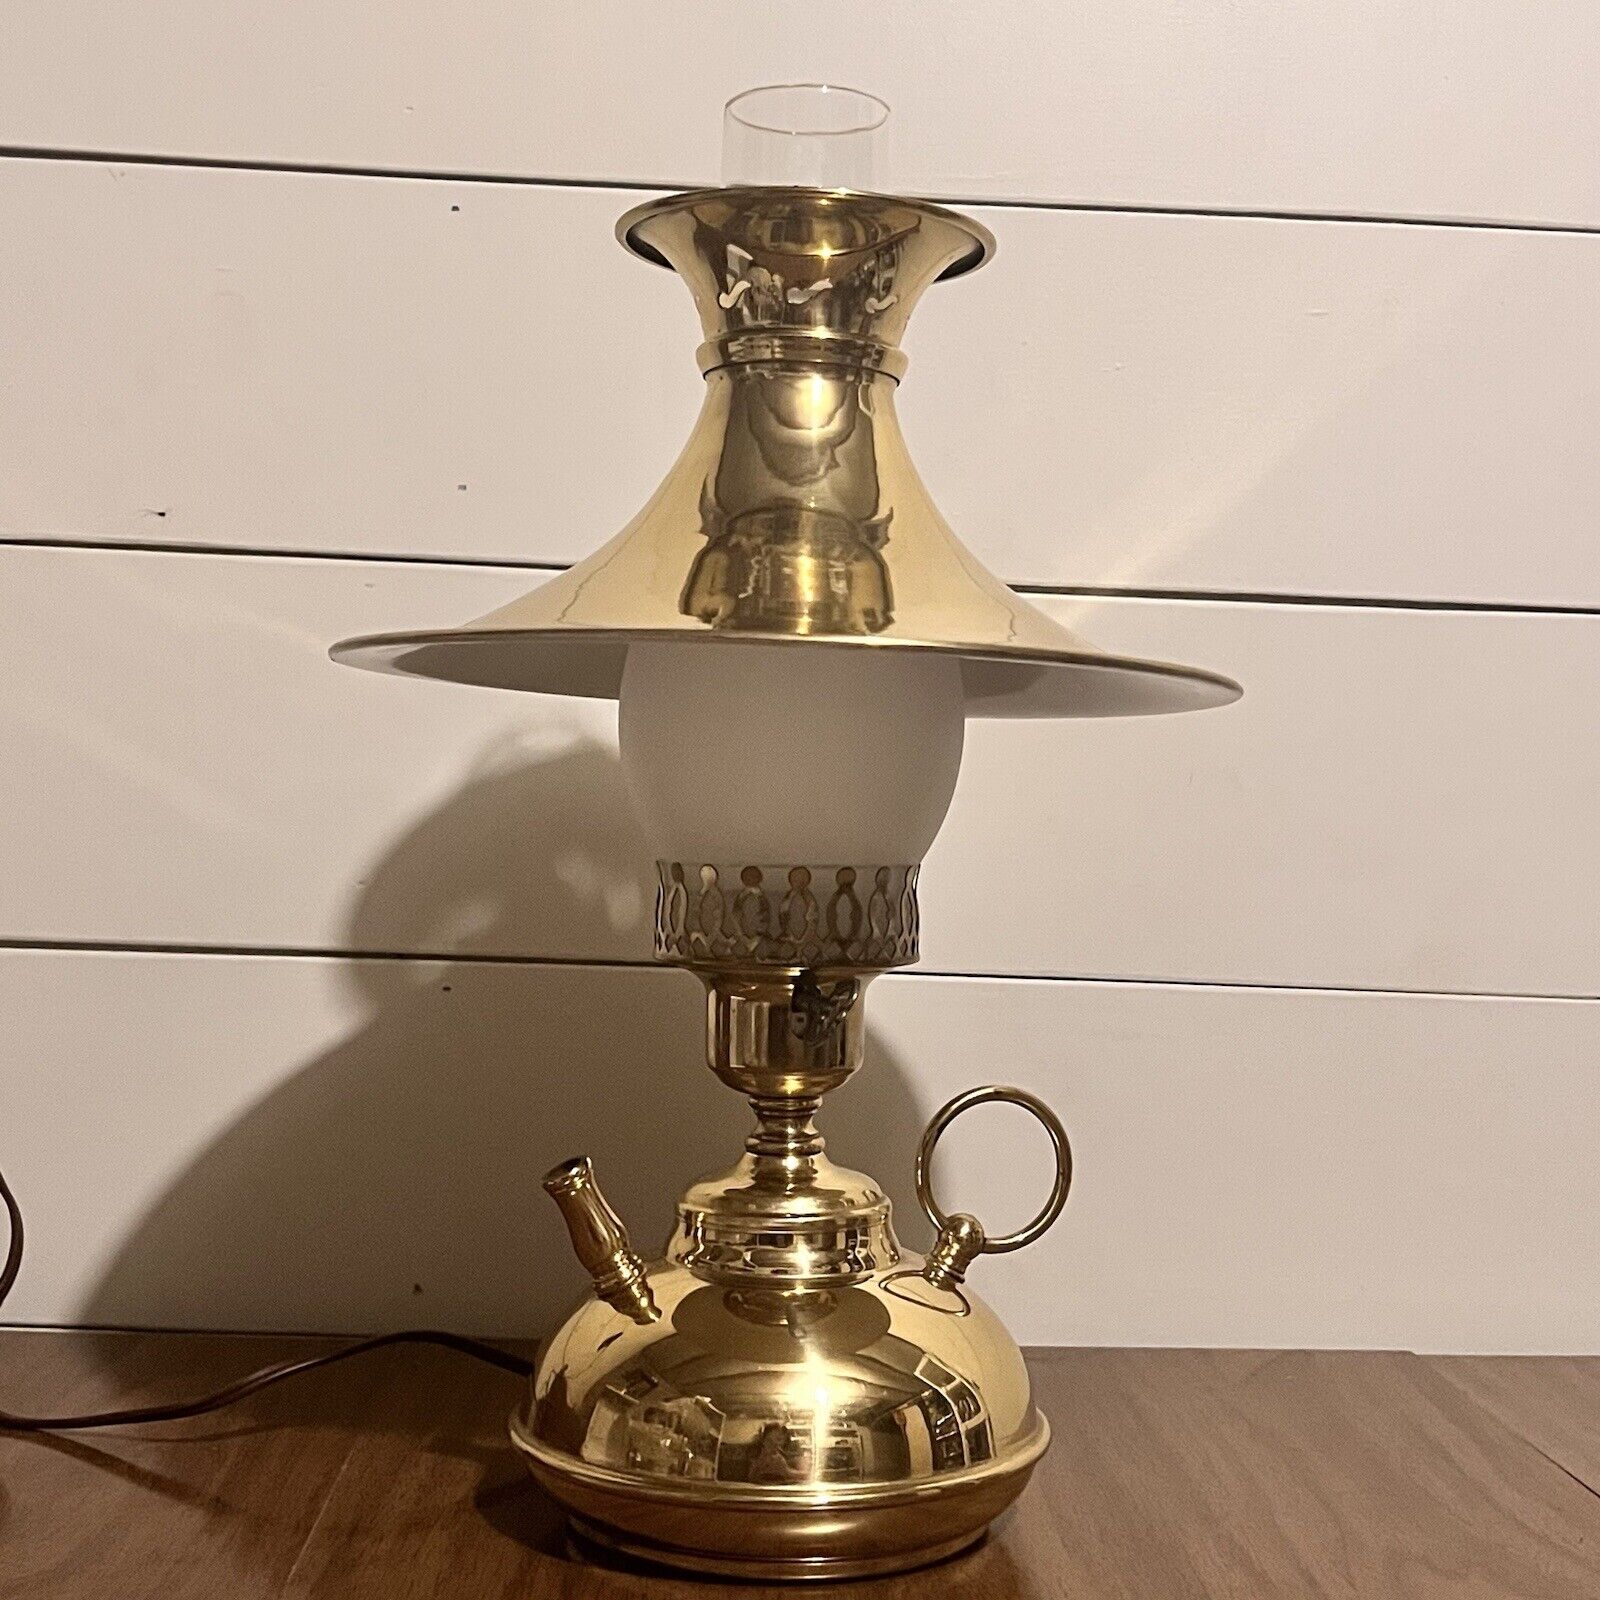 Brass Parlor Lamp Aladdin Lamp Early 20th Century Oil Lamp Style Bell Shade